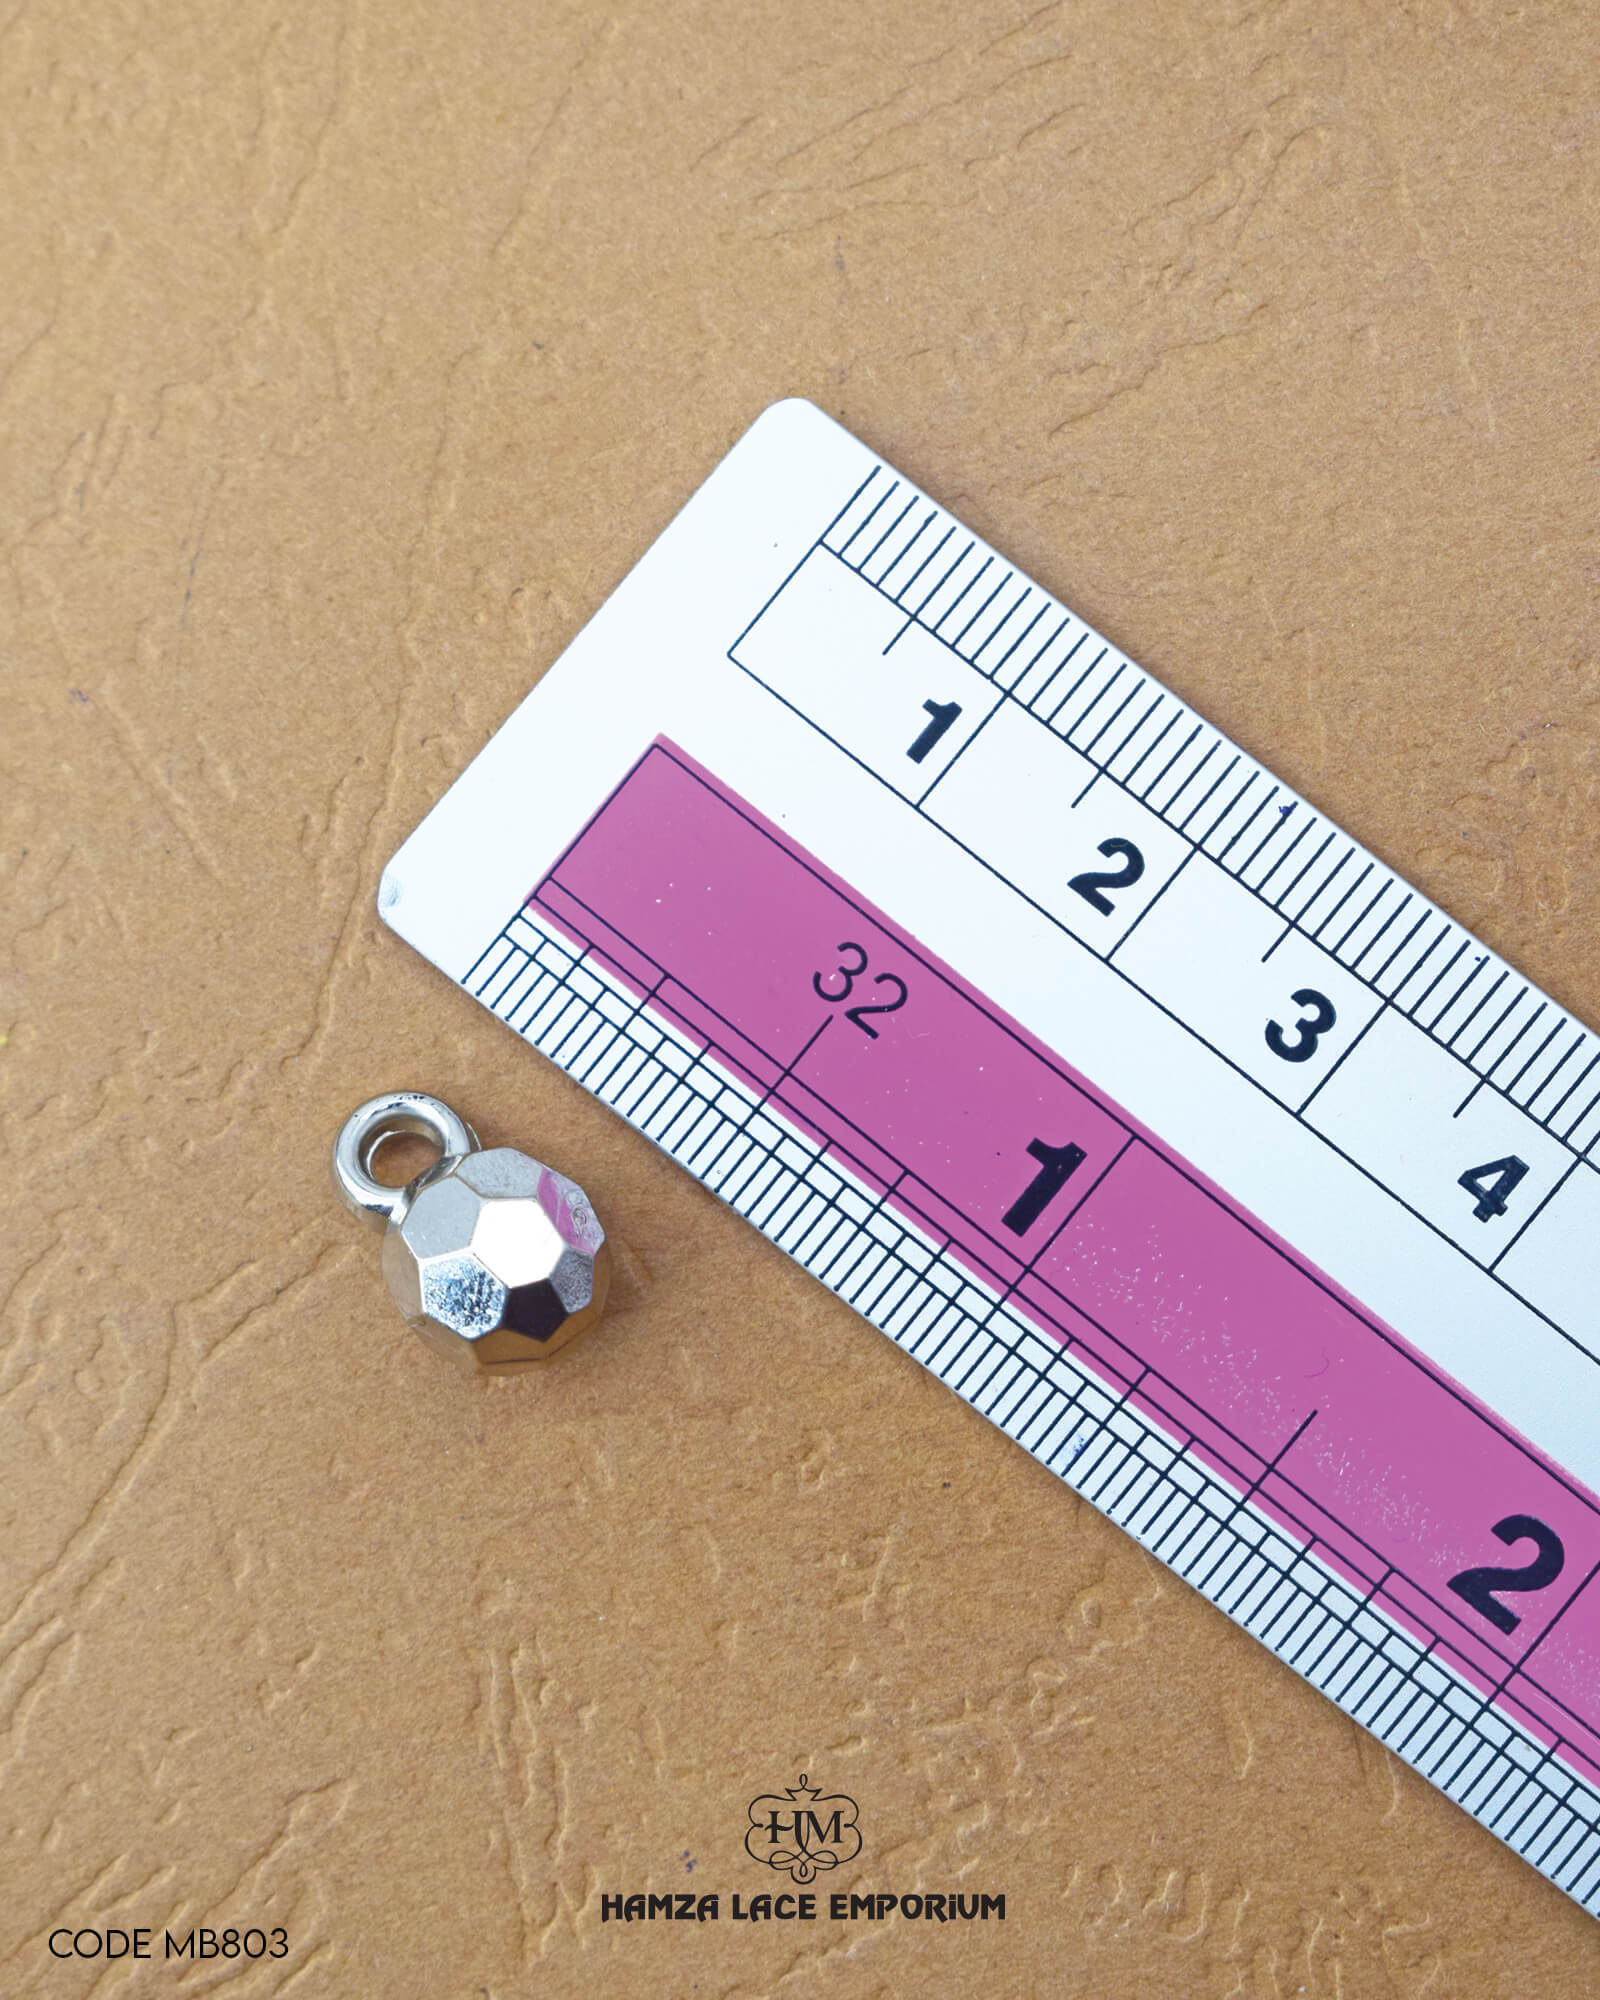 The size of the 'Loop shape Plastic Button MB803' is measured using a ruler.